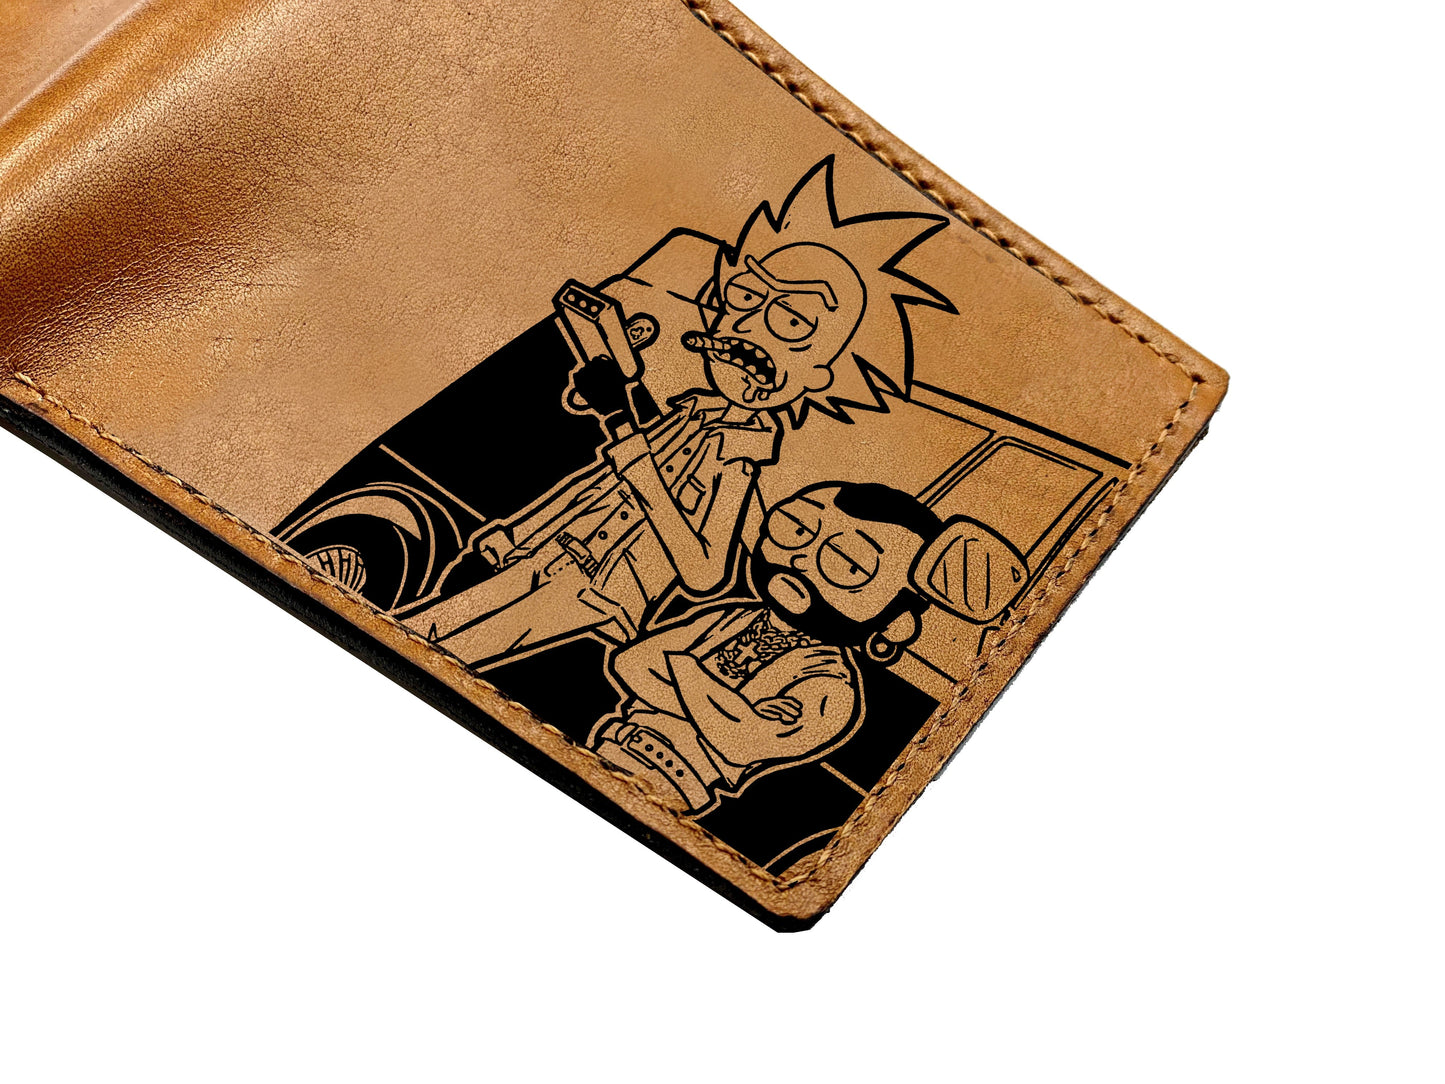 Mayan Corner - Rick and Morty movie series characters leather men's wallet, cartoon art wallet, cool leather gift for him - RM280103